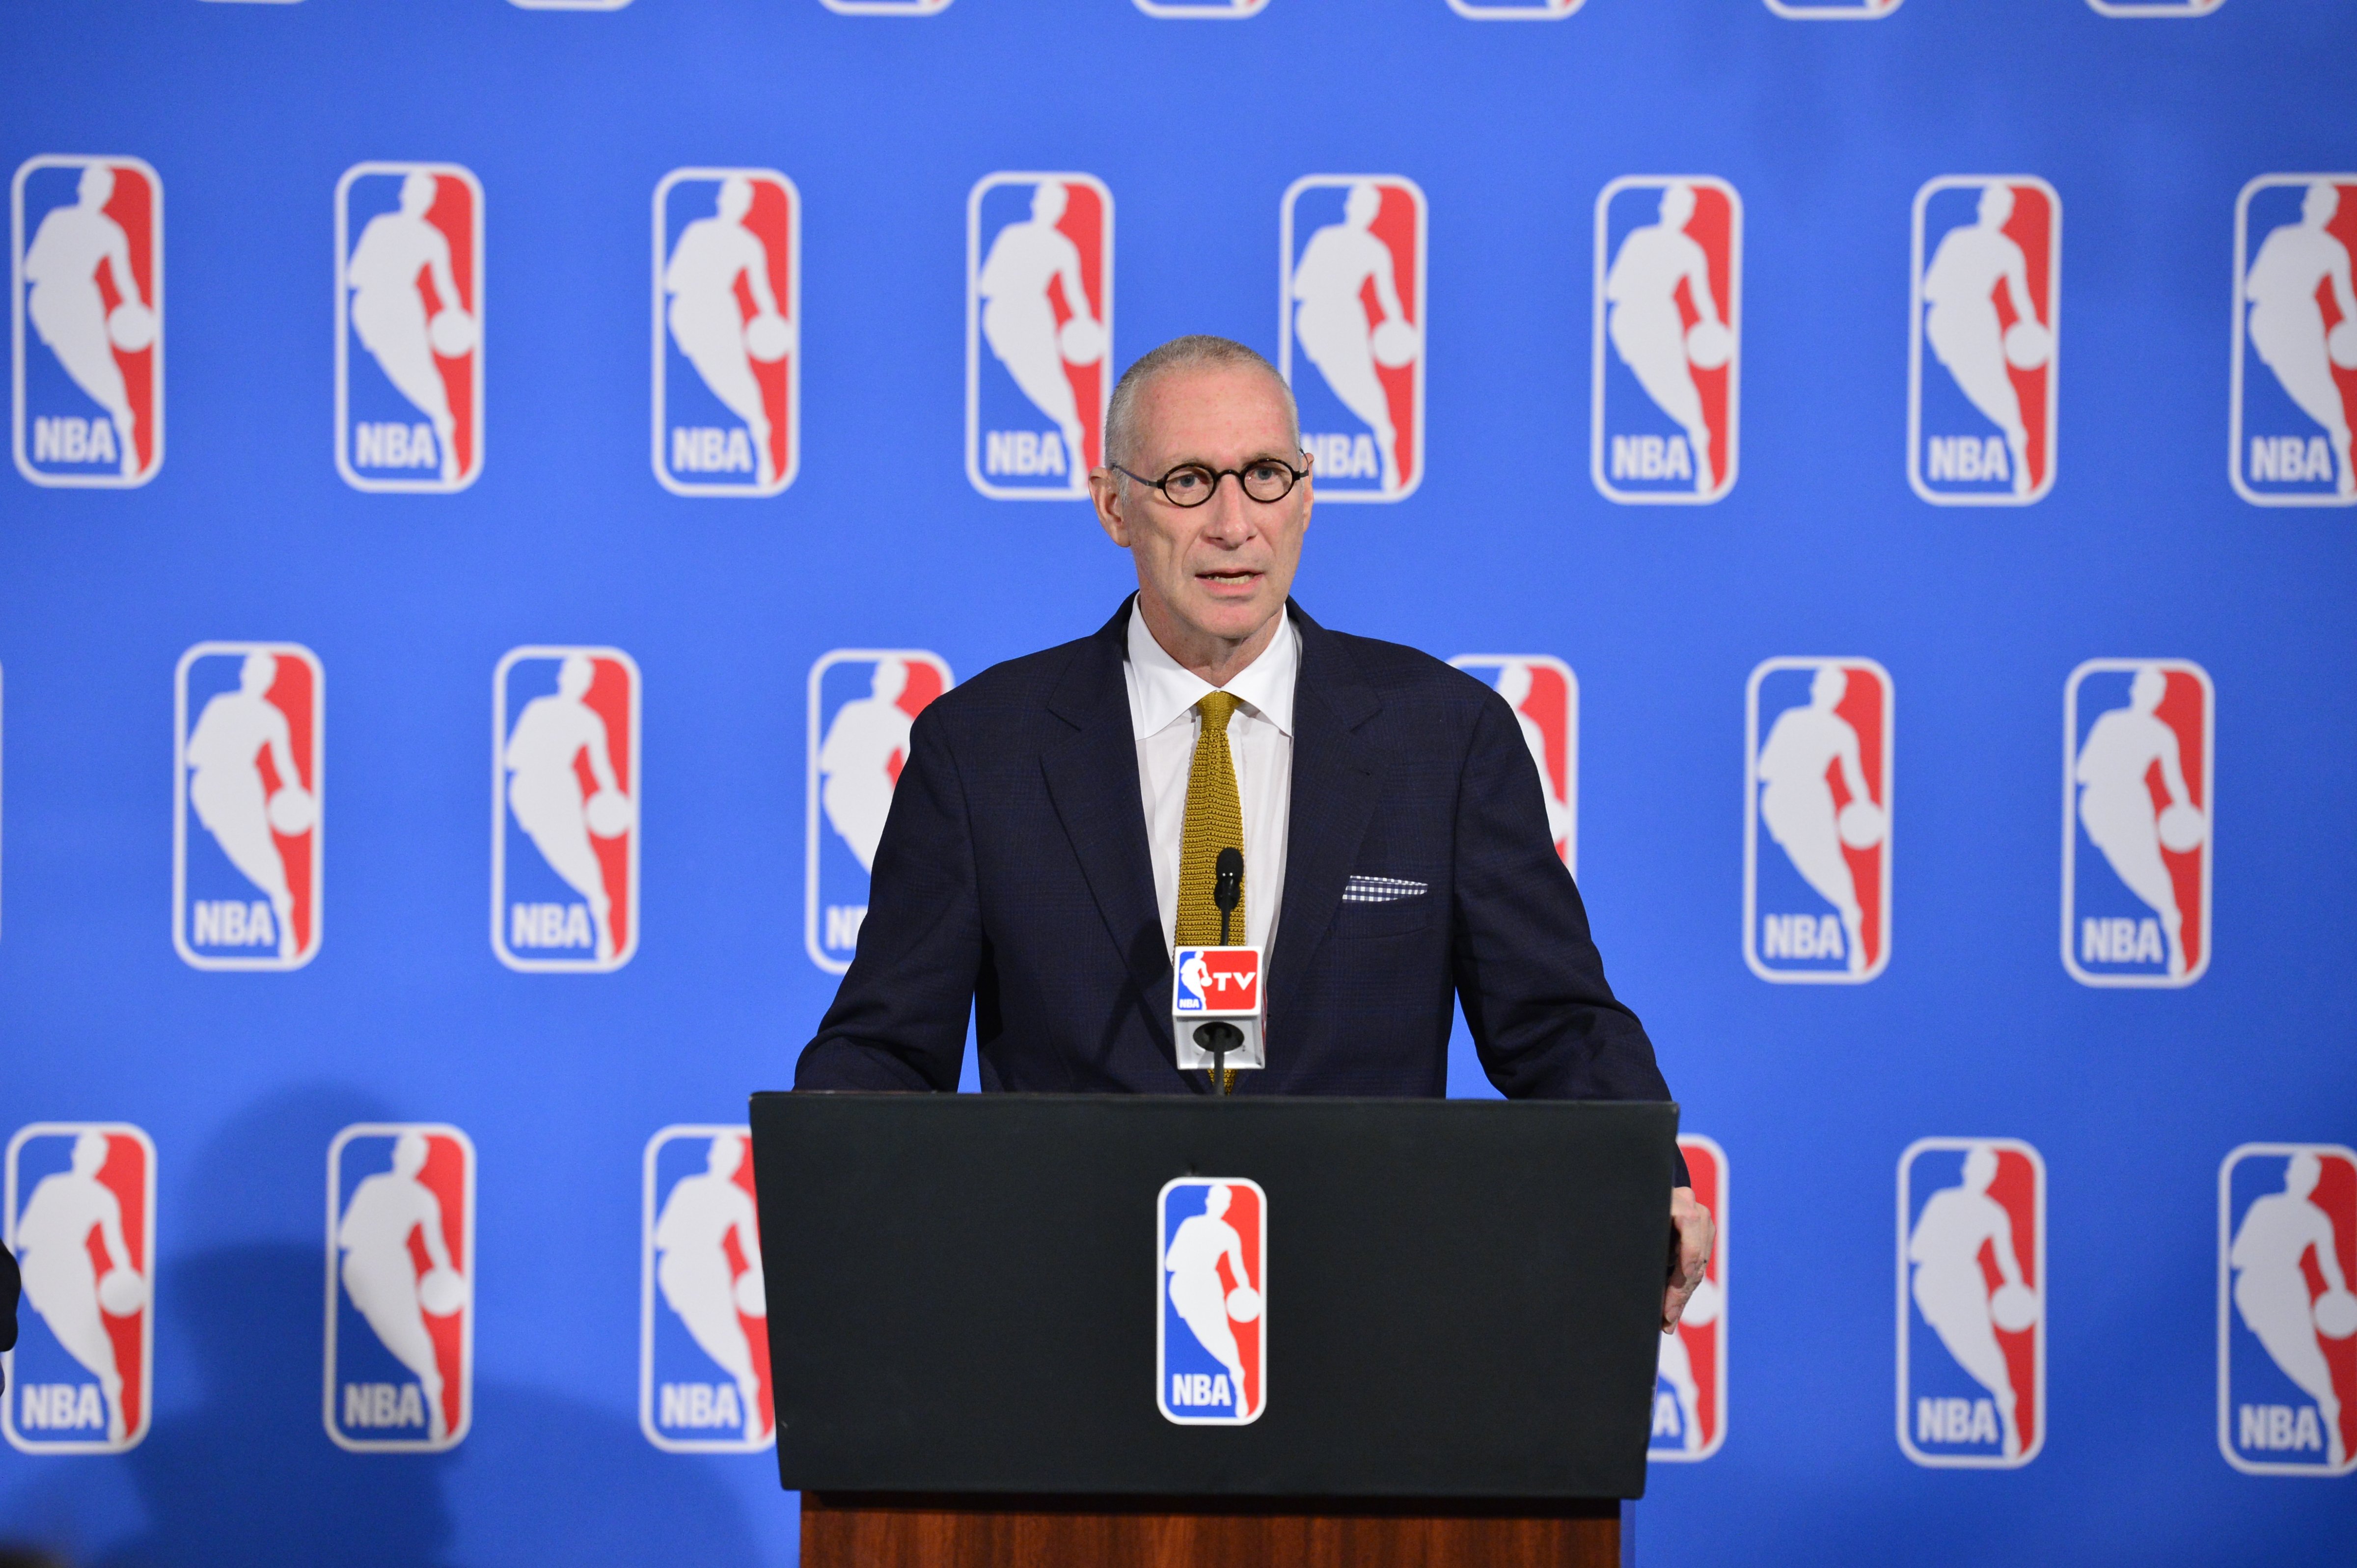 John Skipper, ESPN President and Disney Media Networks Co-Chairman and the NBA announce a new media partnerships on October 06, 2014 in New York City, New York. (David Dow&mdash;NBAE/Getty Images)